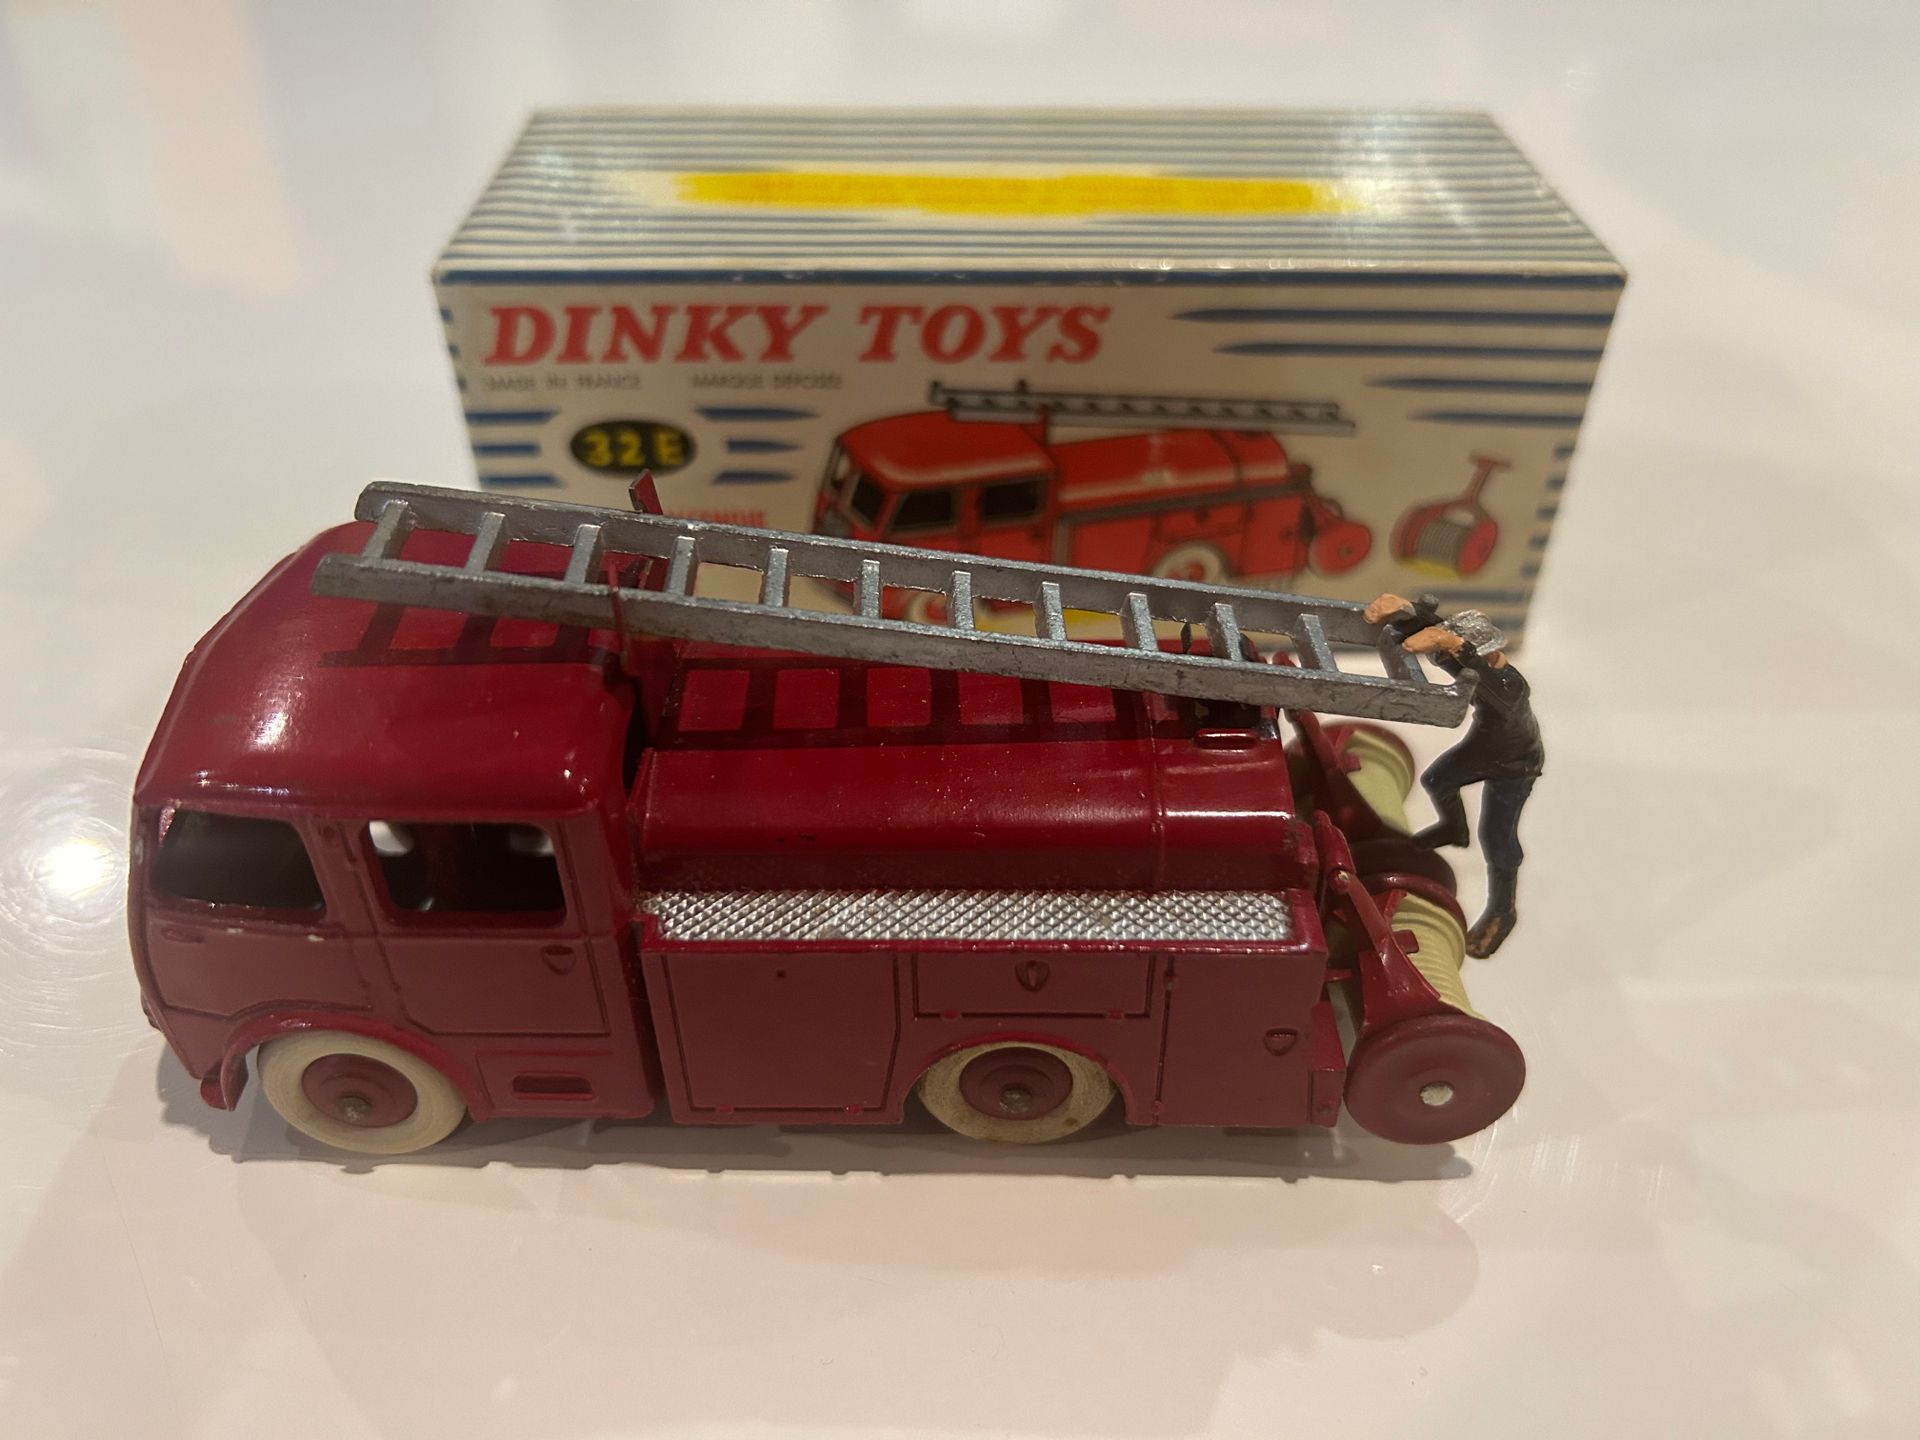 DINKY TOYS DINKY TOYS
32E Berliet fire and rescue van
In box